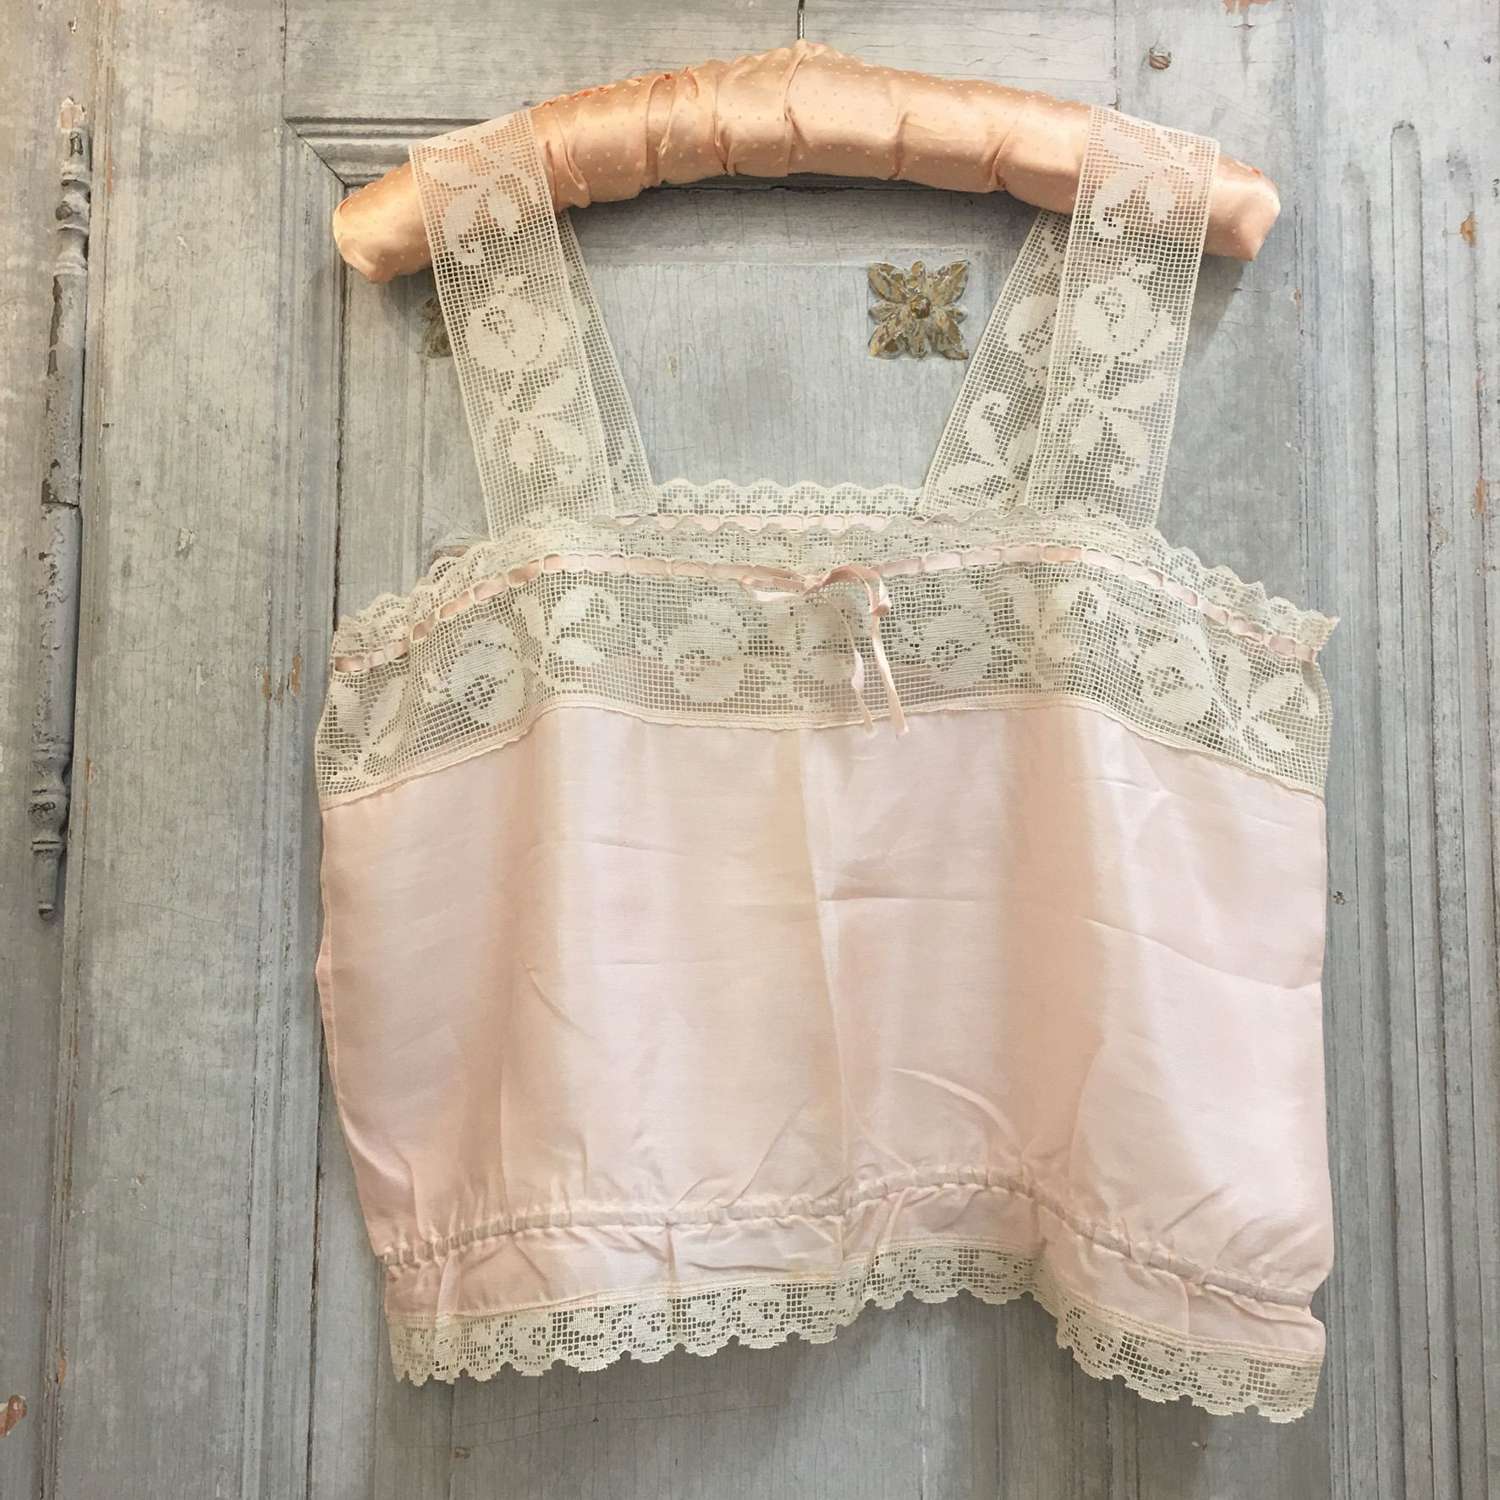 Vintage silk and lace camisole 38”/97cm chest